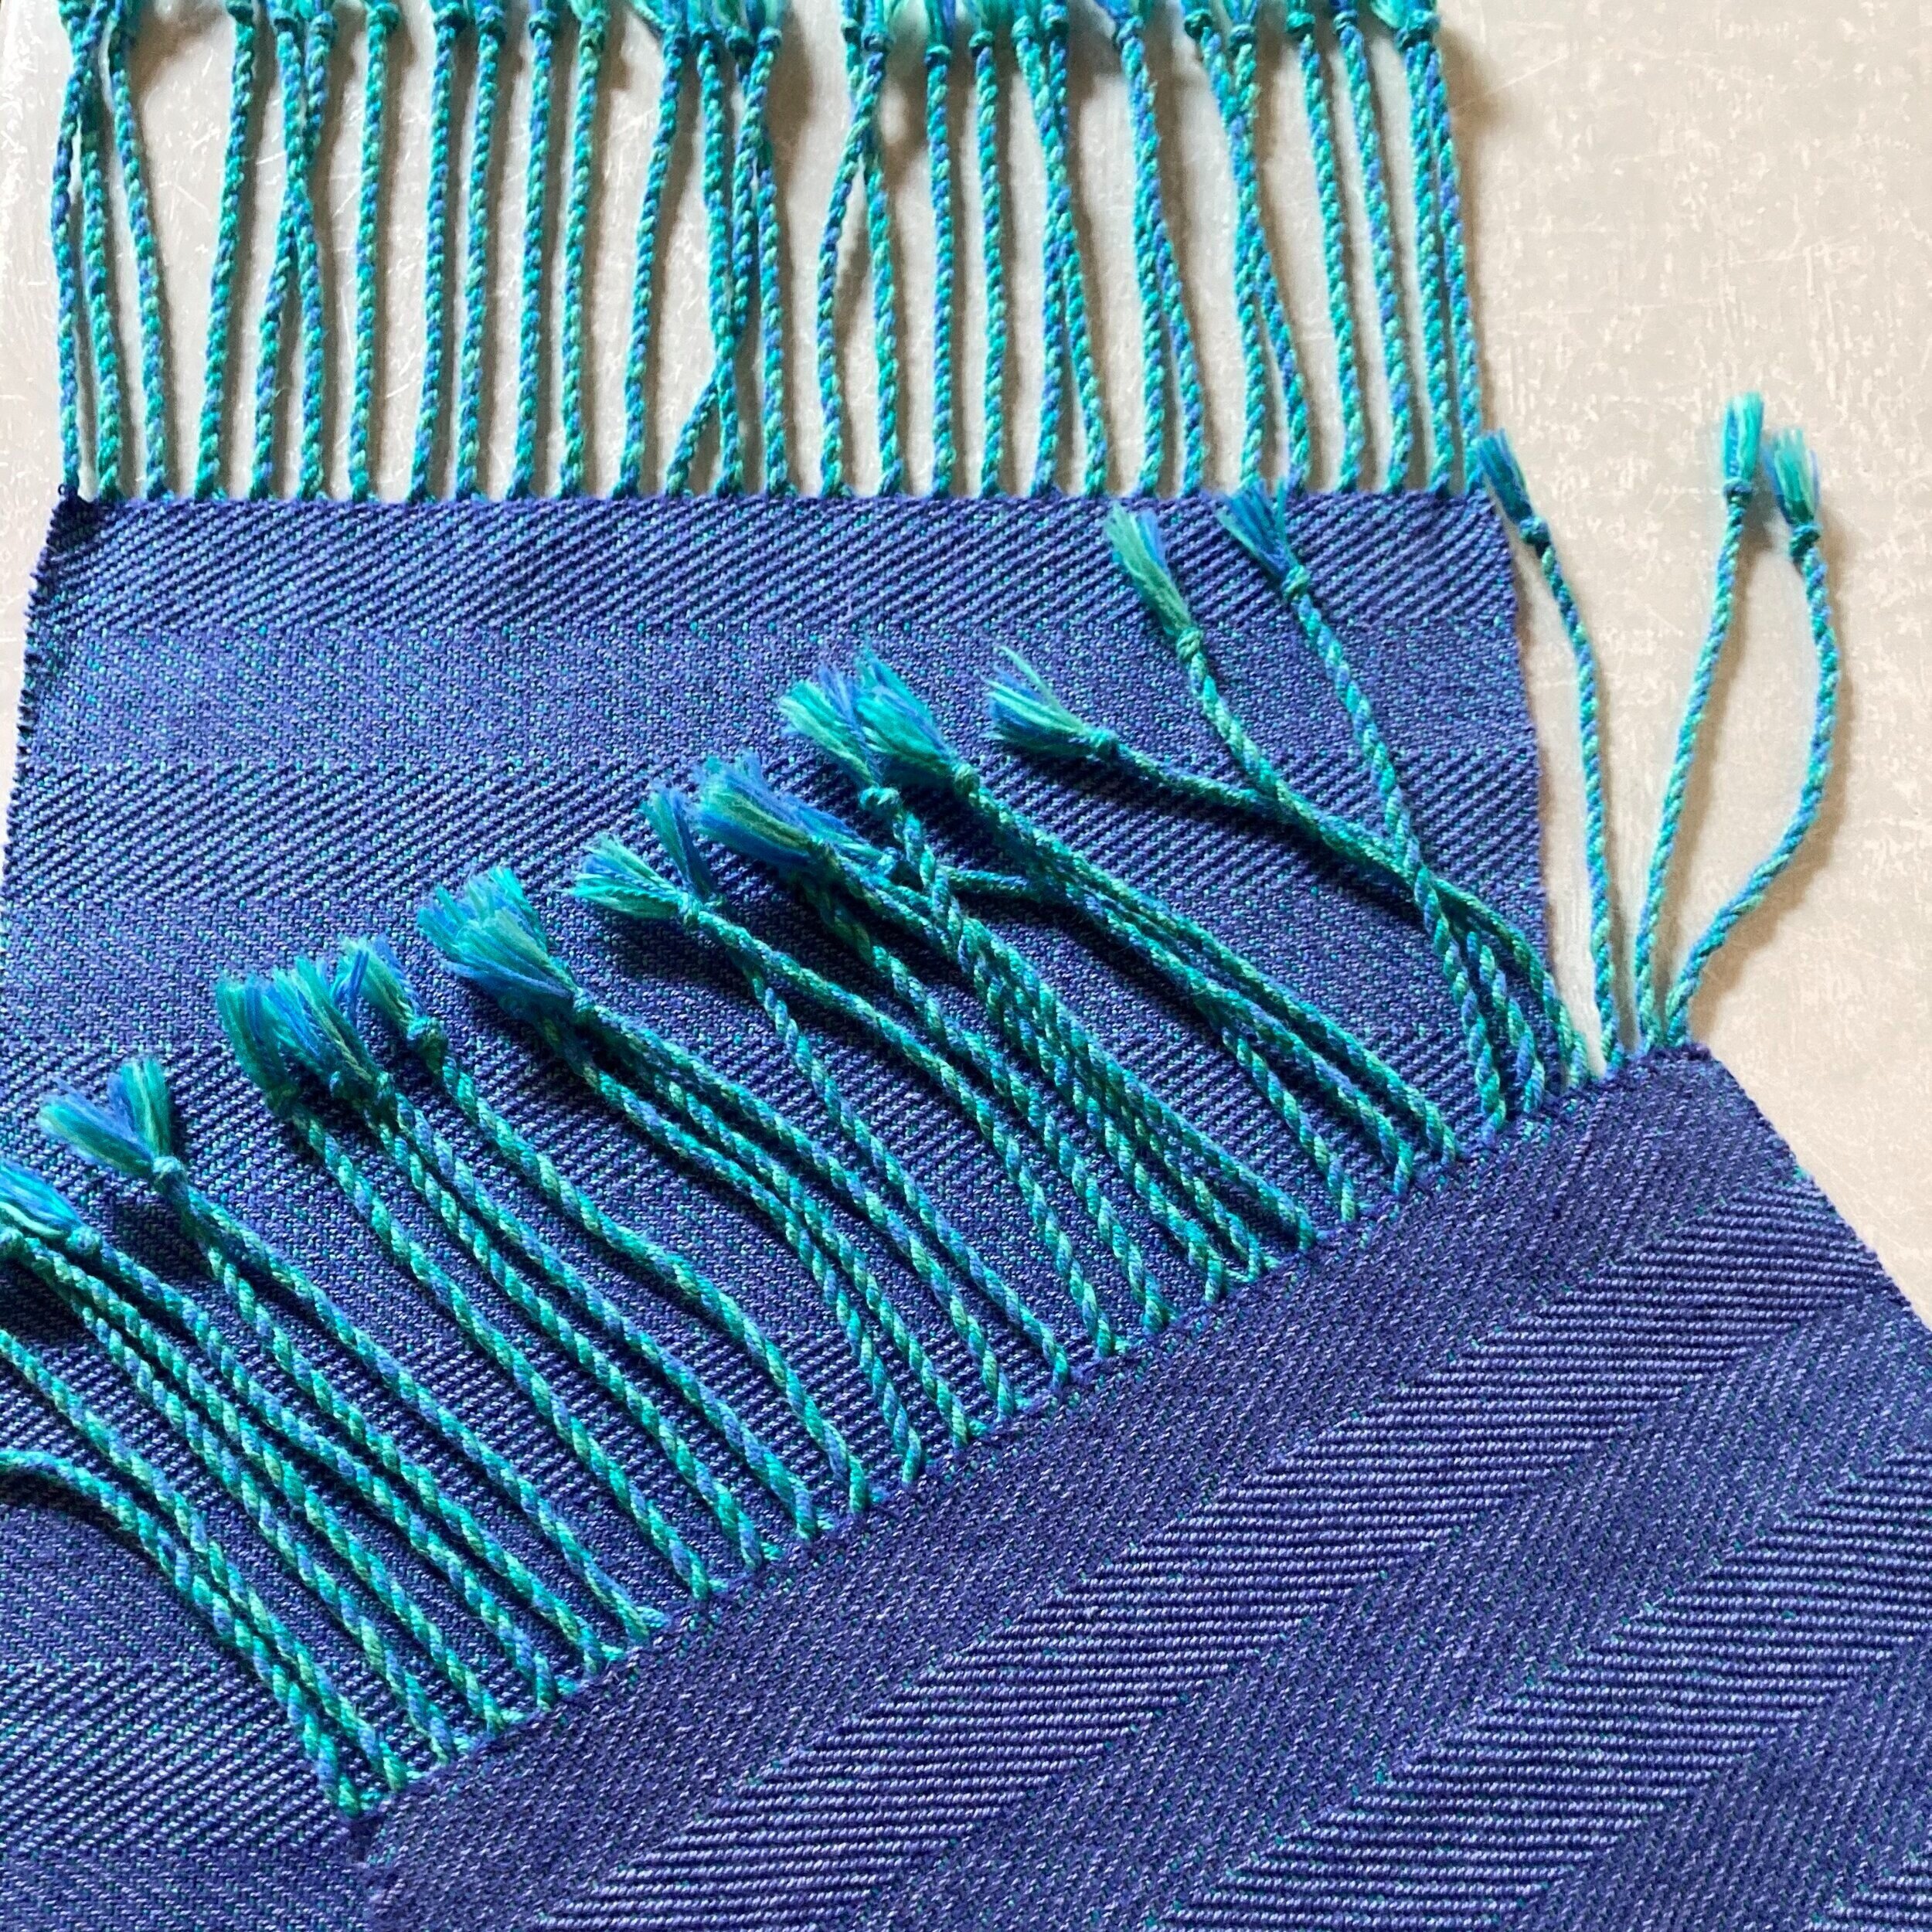 Handwoven Table Runner with Fringe Tina Knop Morse